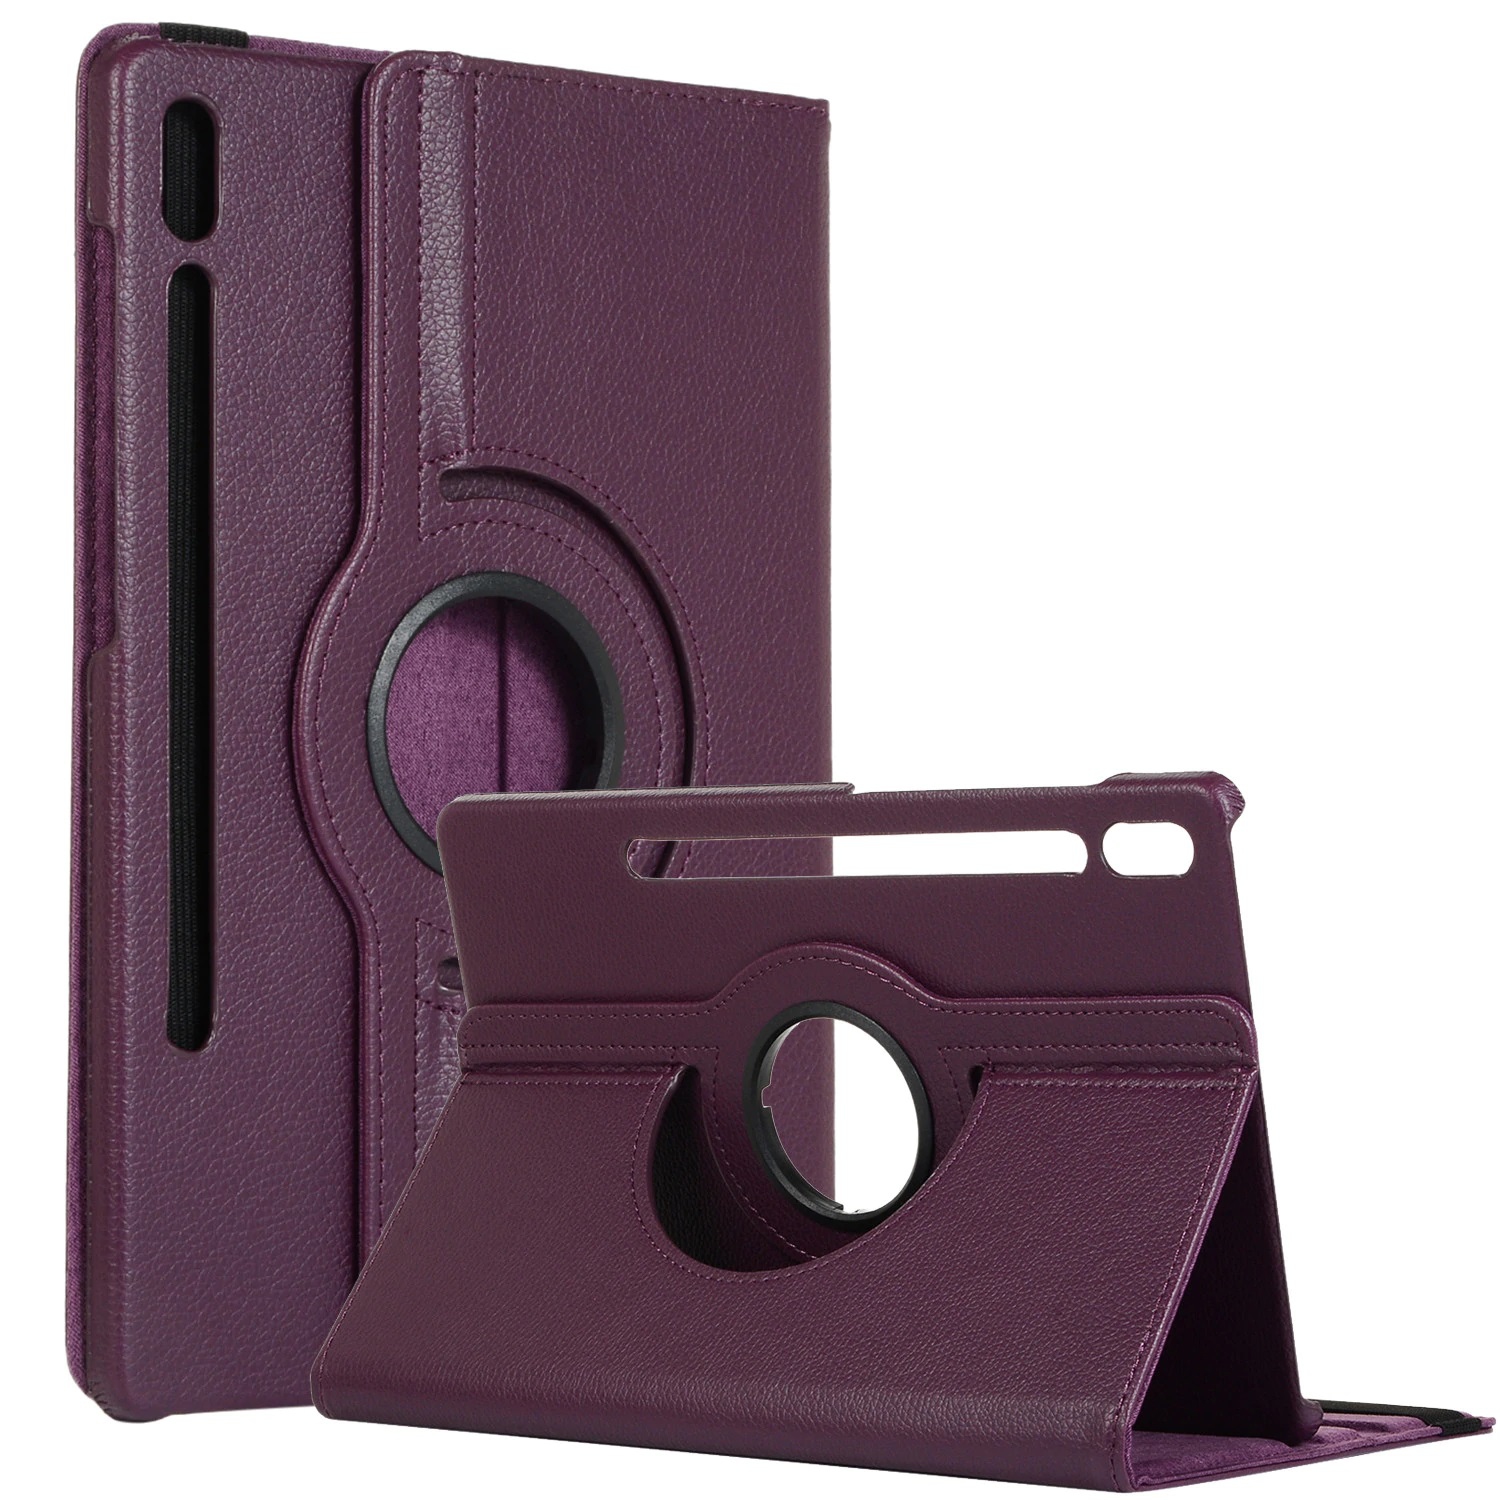 【CSmart】 Rotating PU Leather Stand Case Smart Cover for Samsung Galaxy Tab S7 Plus / S8 Plus 2022 12.4", T970 / X800, Purple